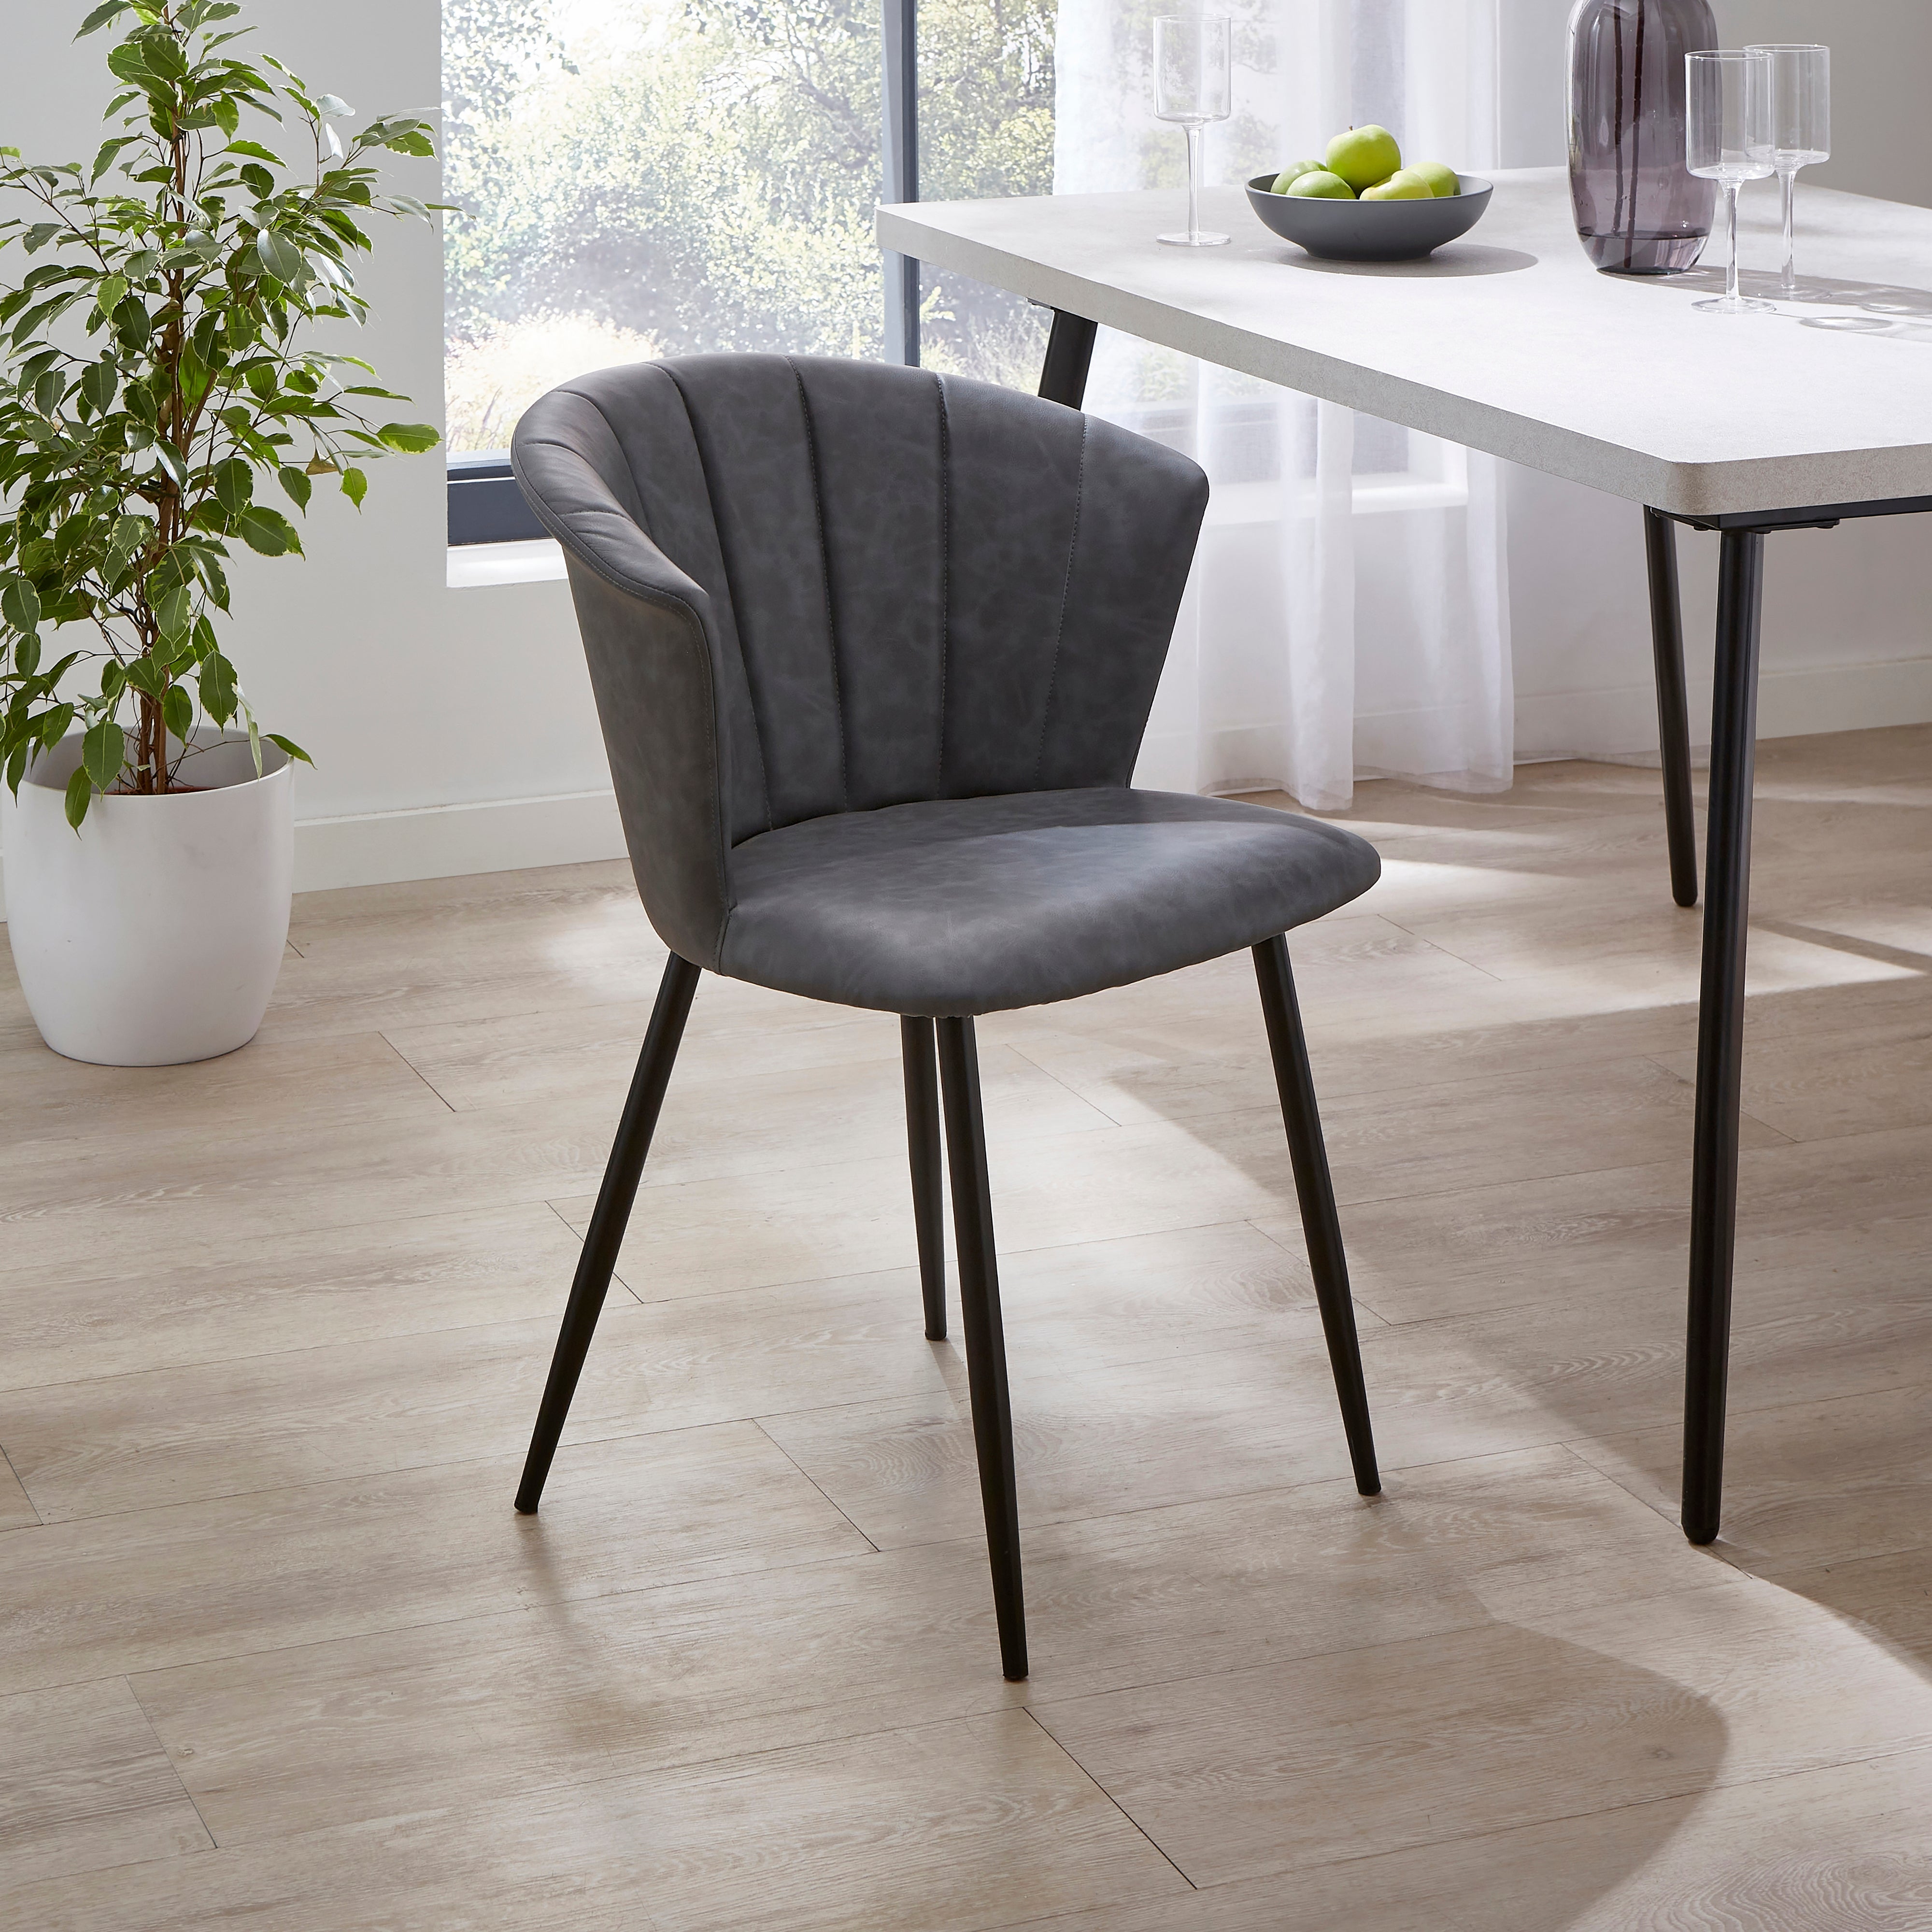 Kendall Dining Chair Faux Leather Grey